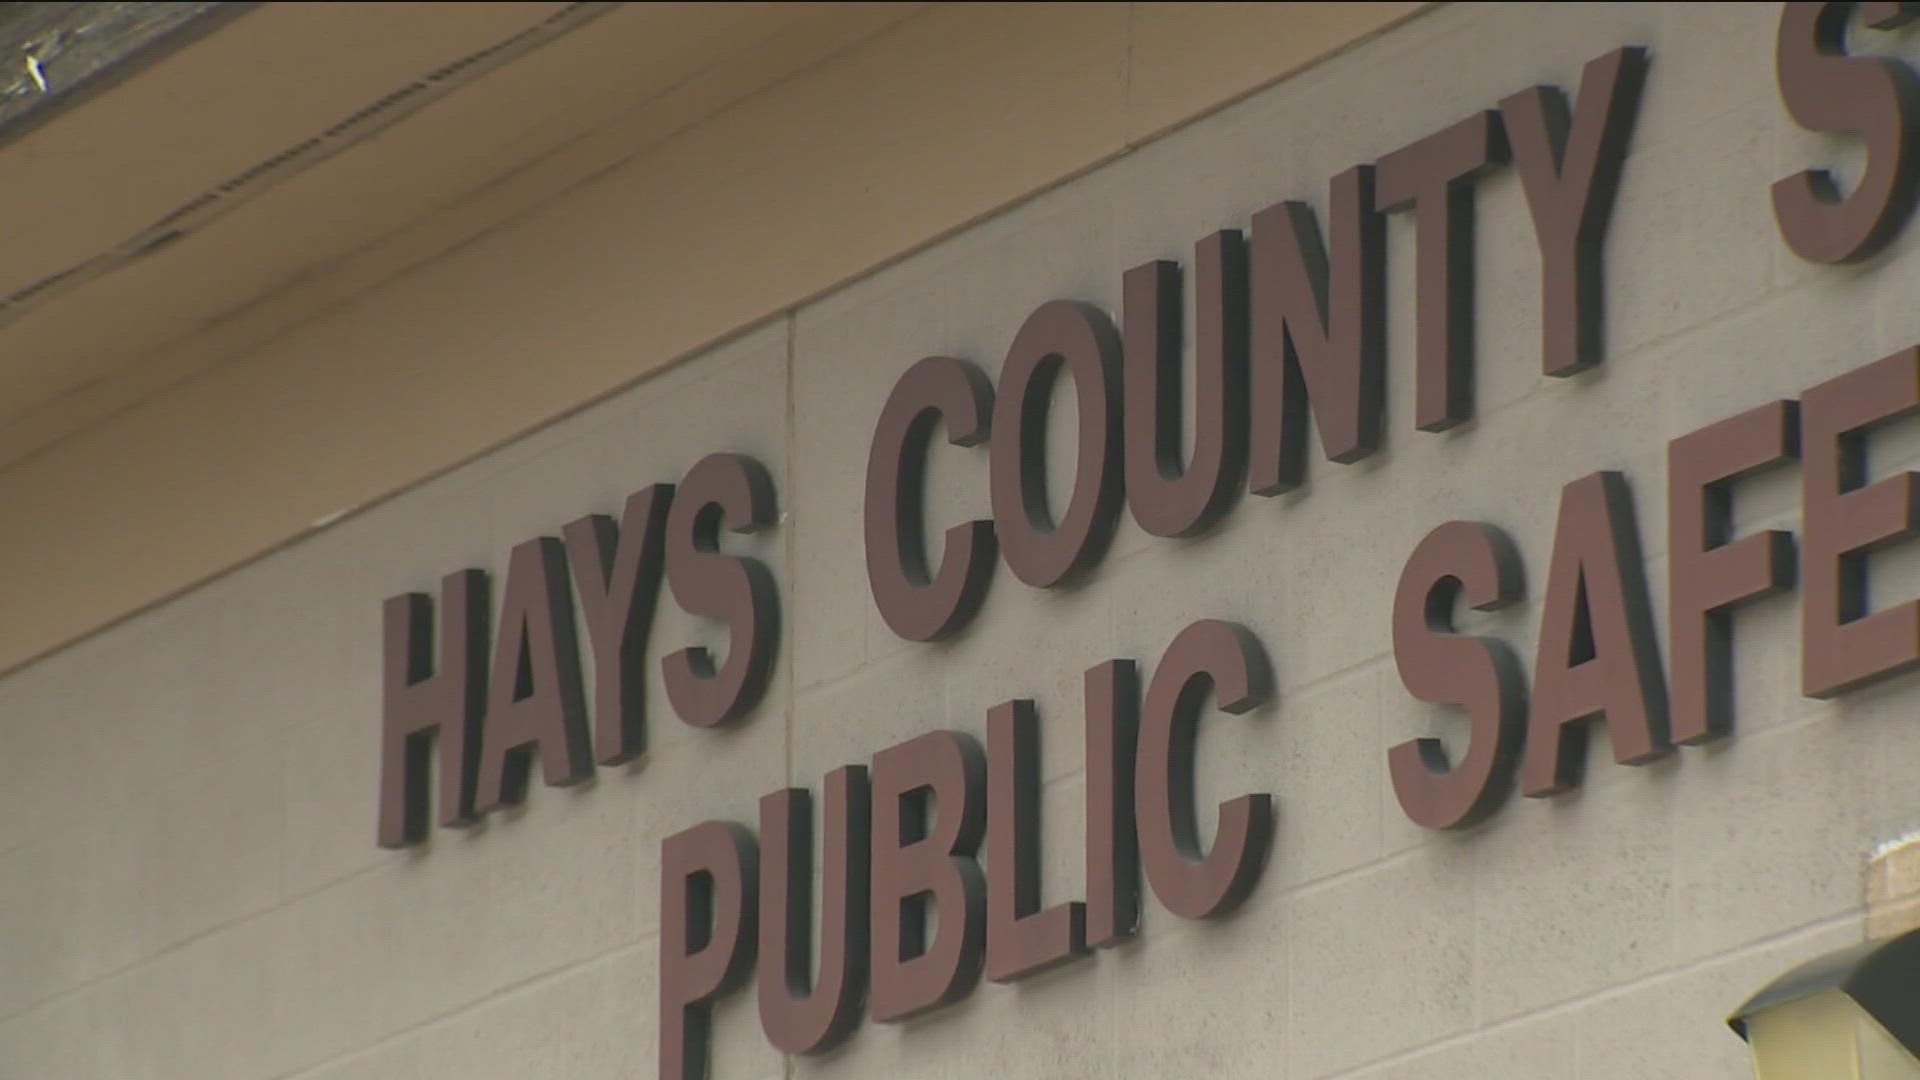 Hays County commissioners are spending more taxpayer money, sending inmates to jails in other counties.